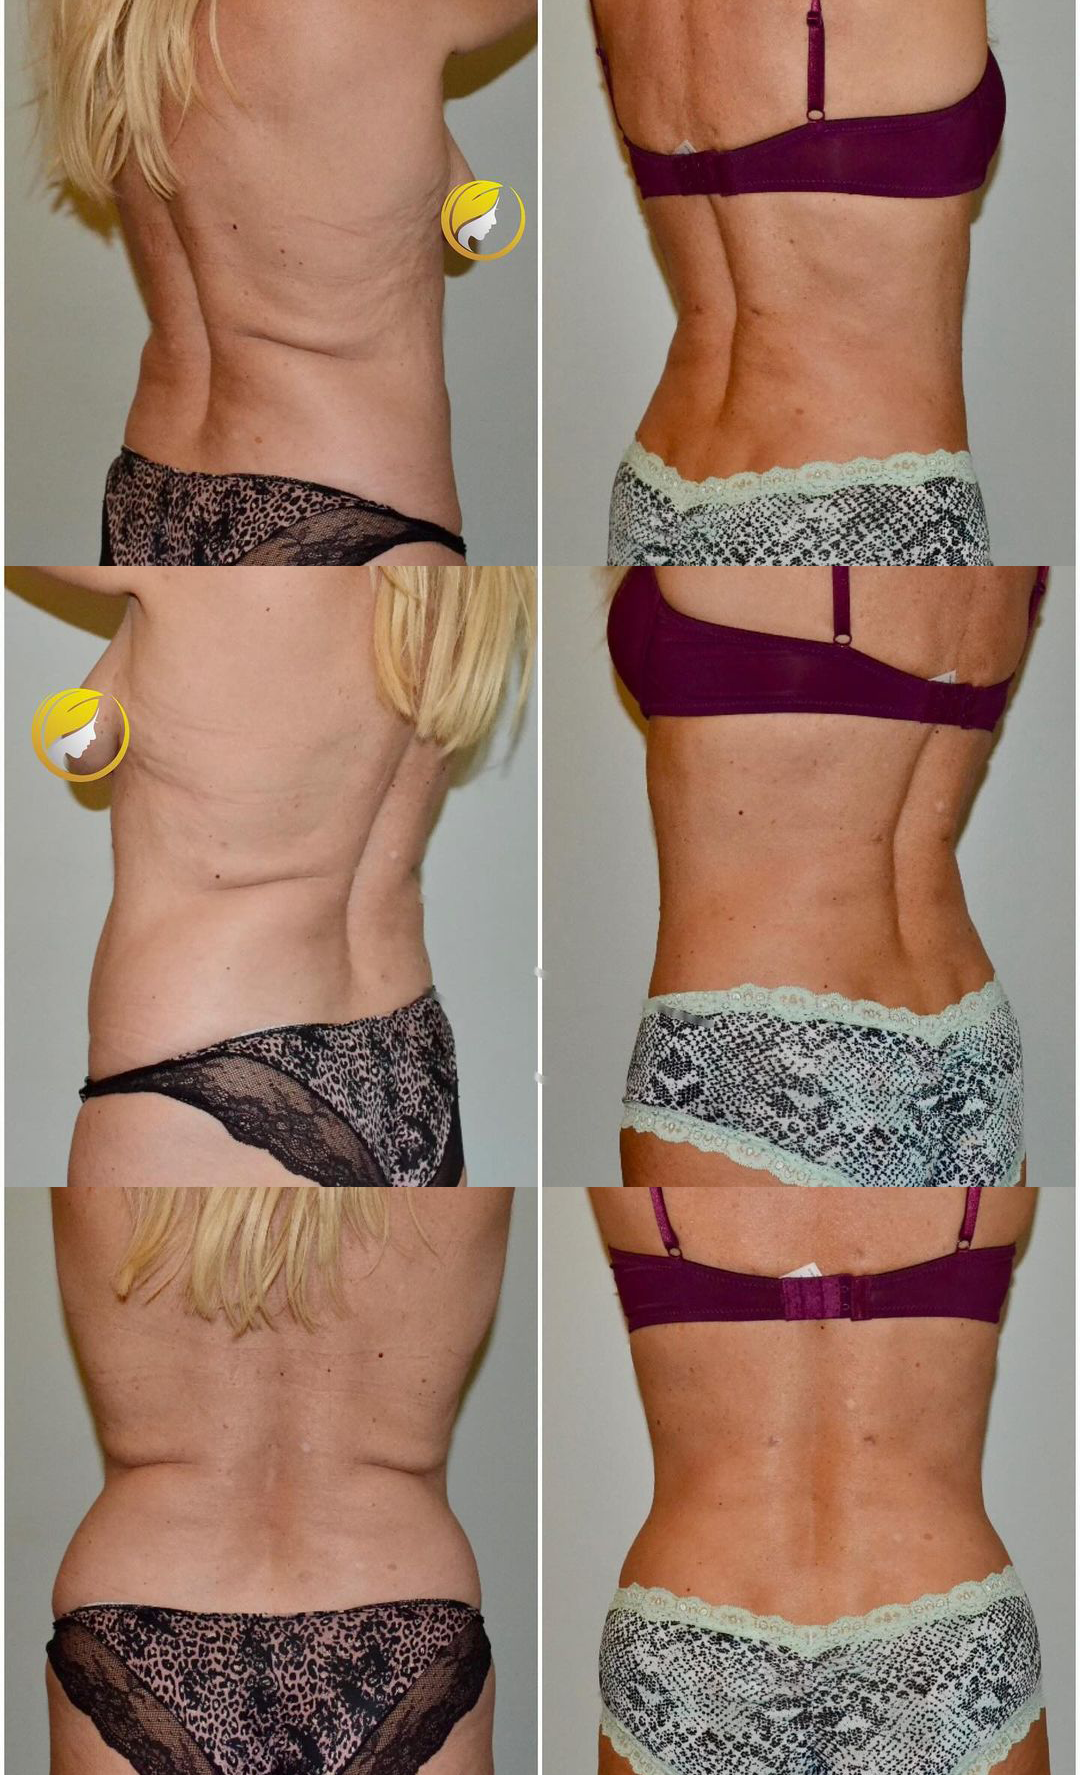 Before and After Plastic Surgery: Liposuction